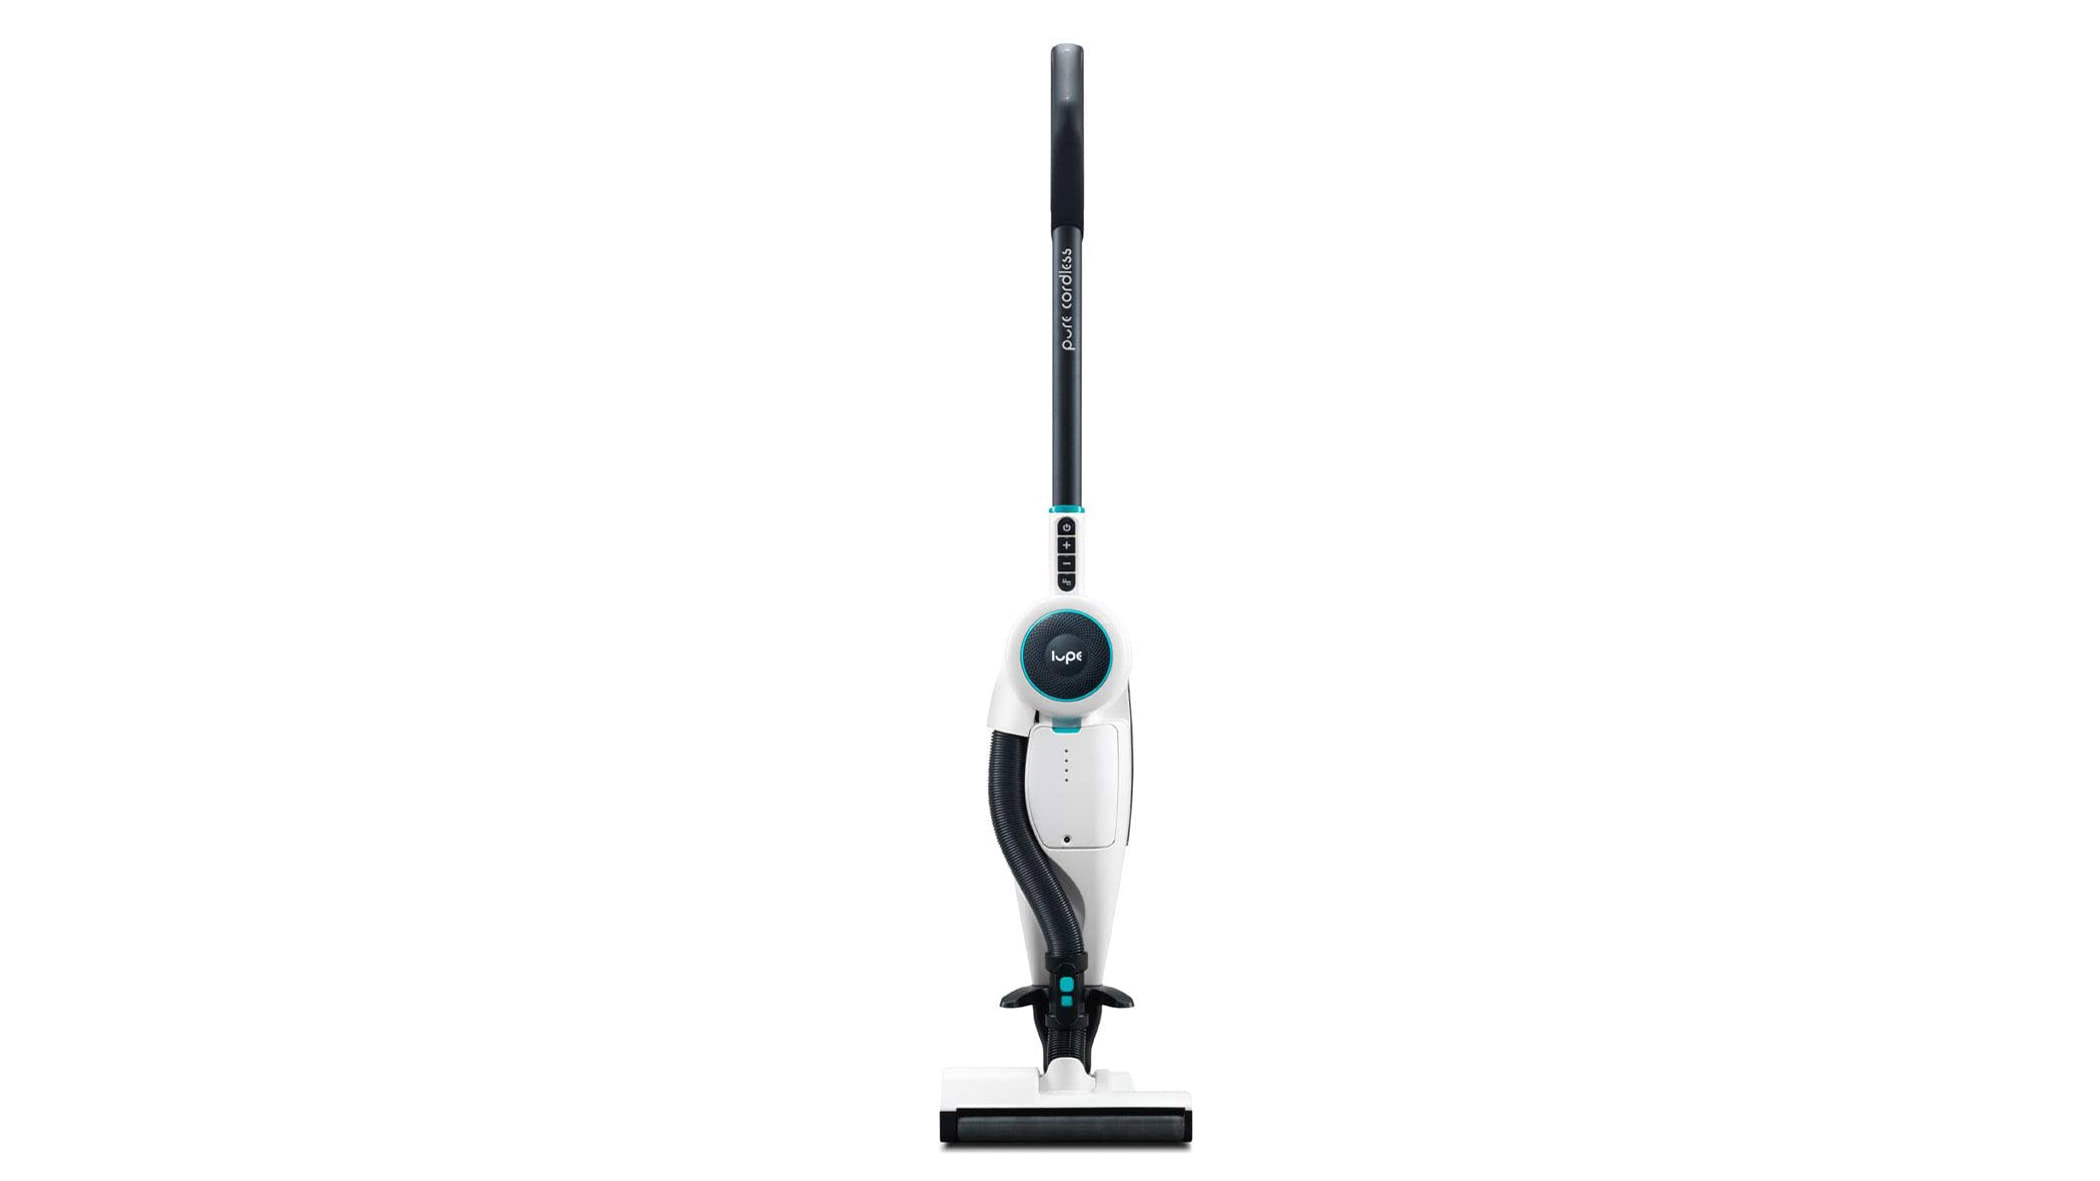 The Lupe Pure Cordless vacuum cleaner on a white background